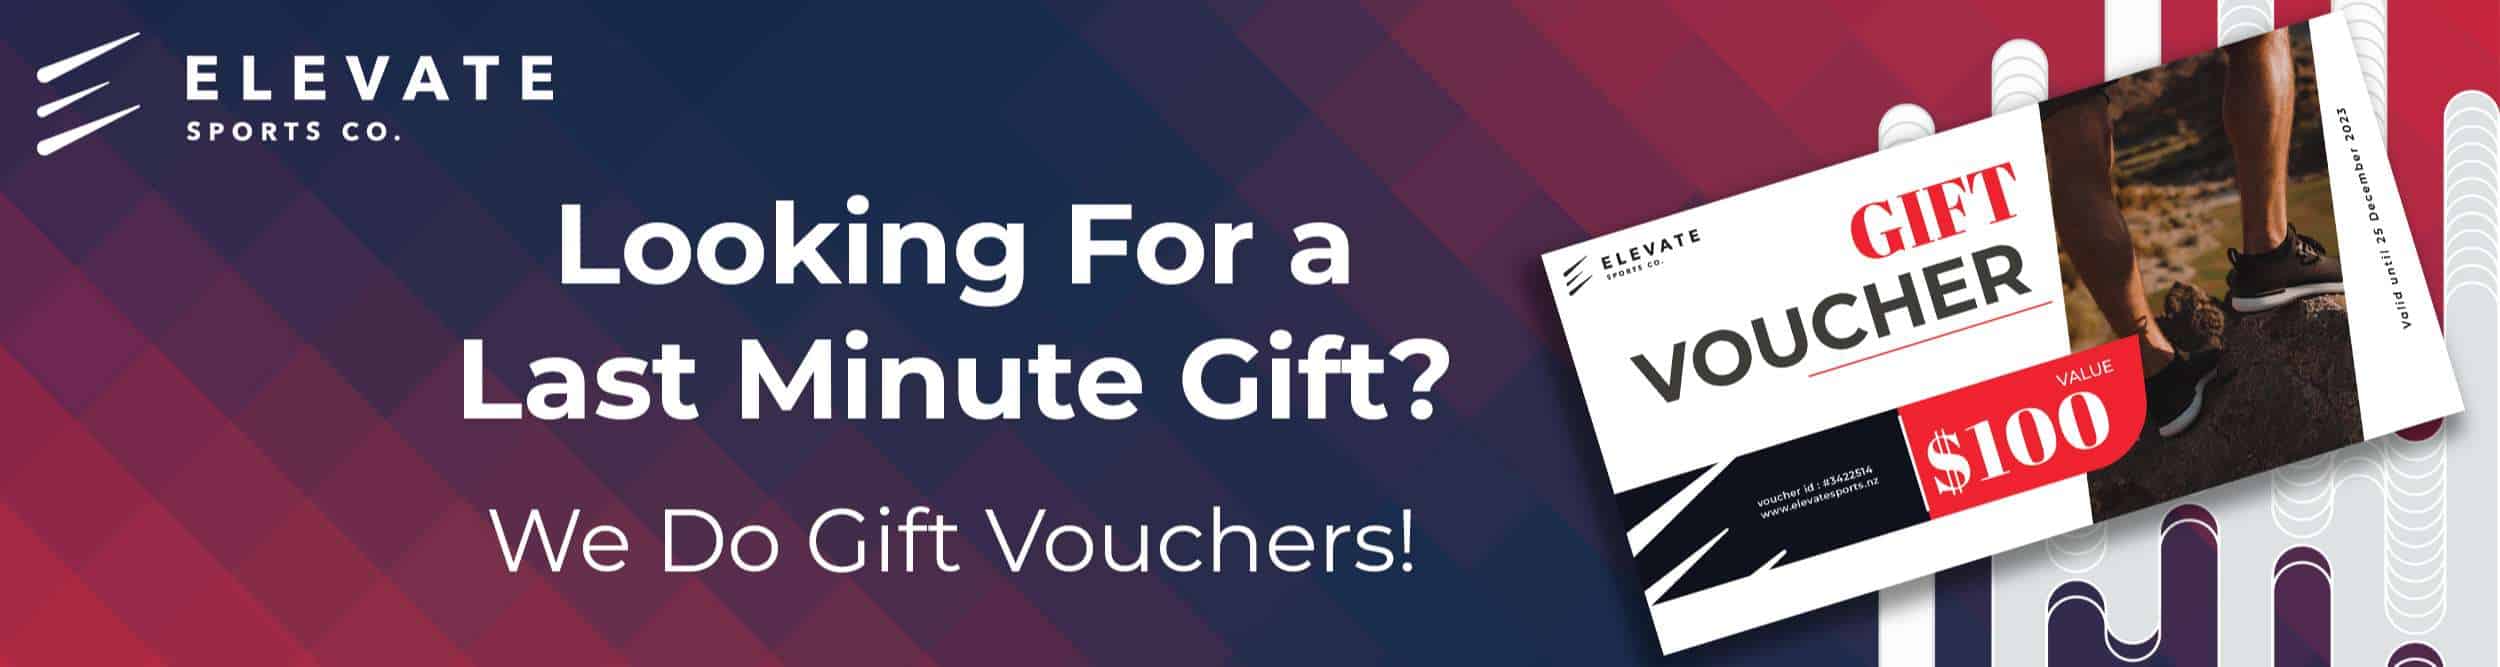 elevate sports gift vouchers